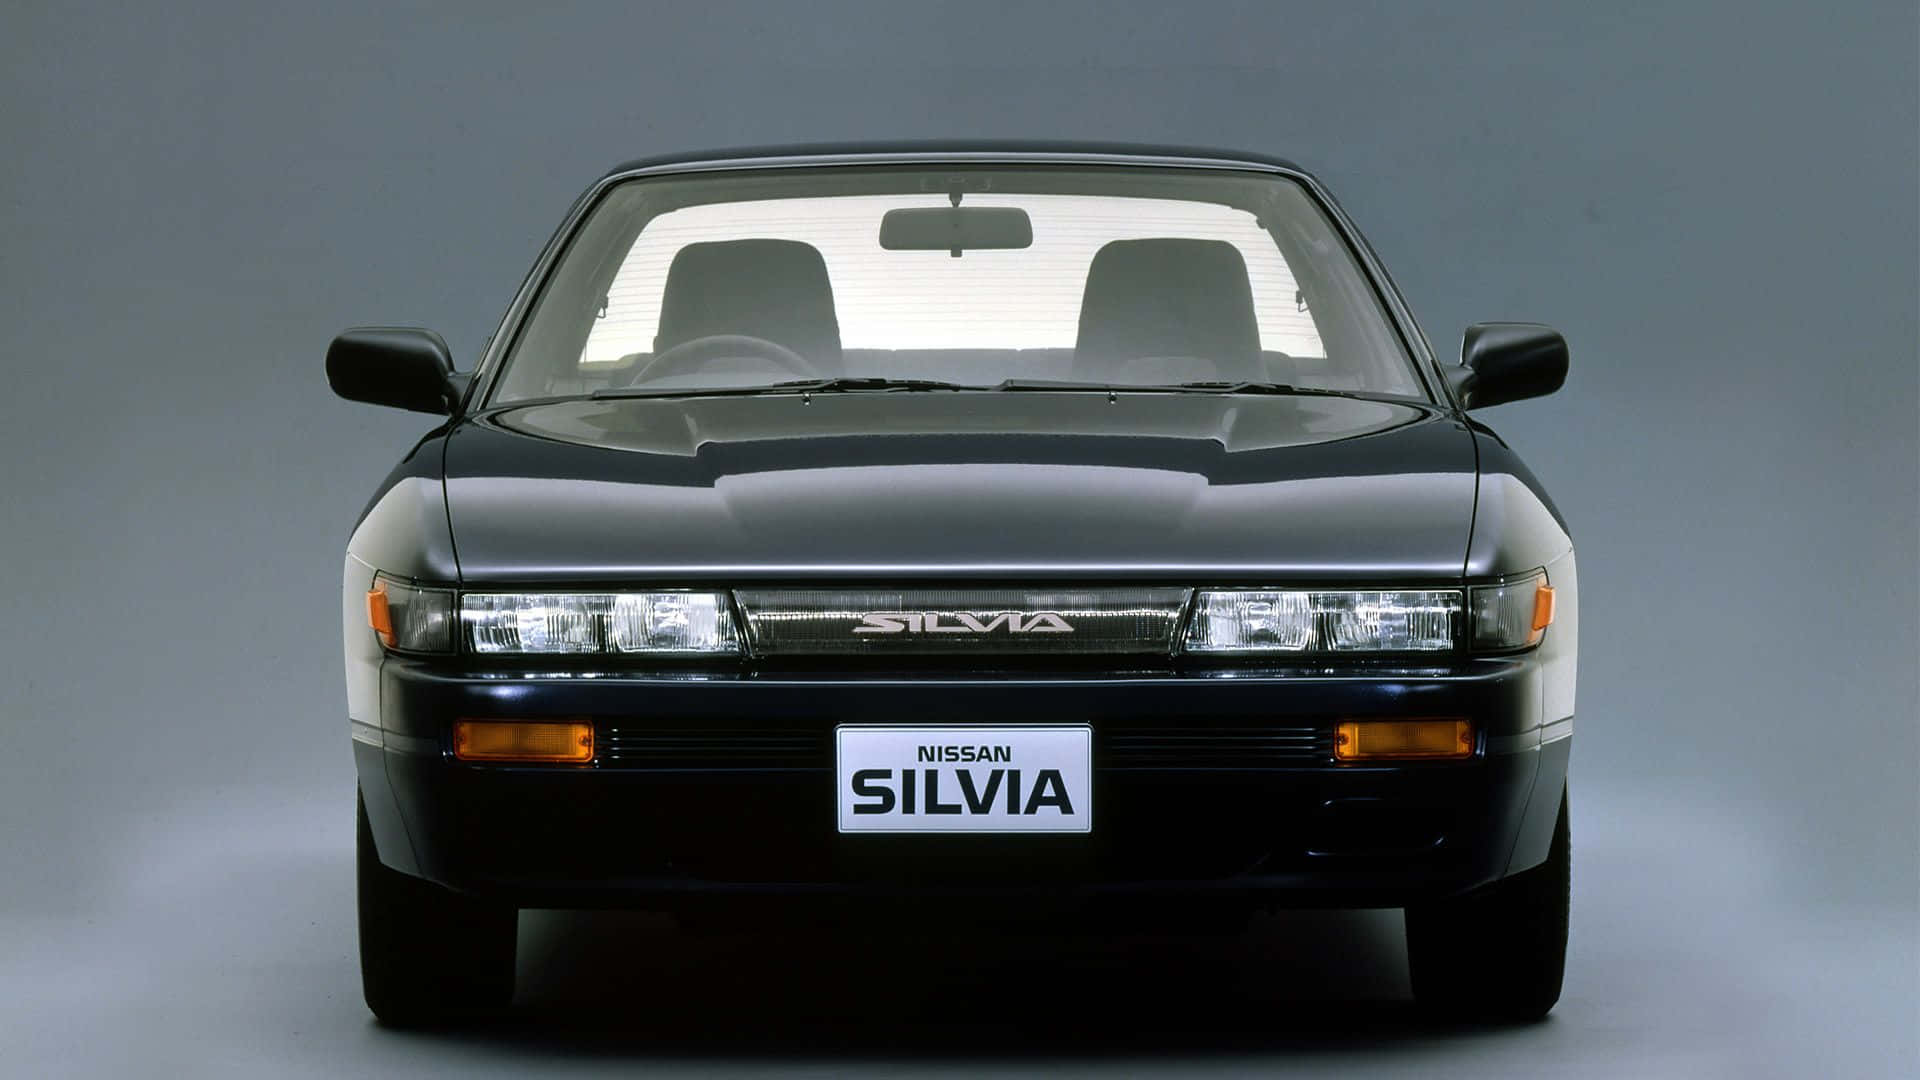 "Take a Ride in Style with the Nissan Silvia S13" Wallpaper